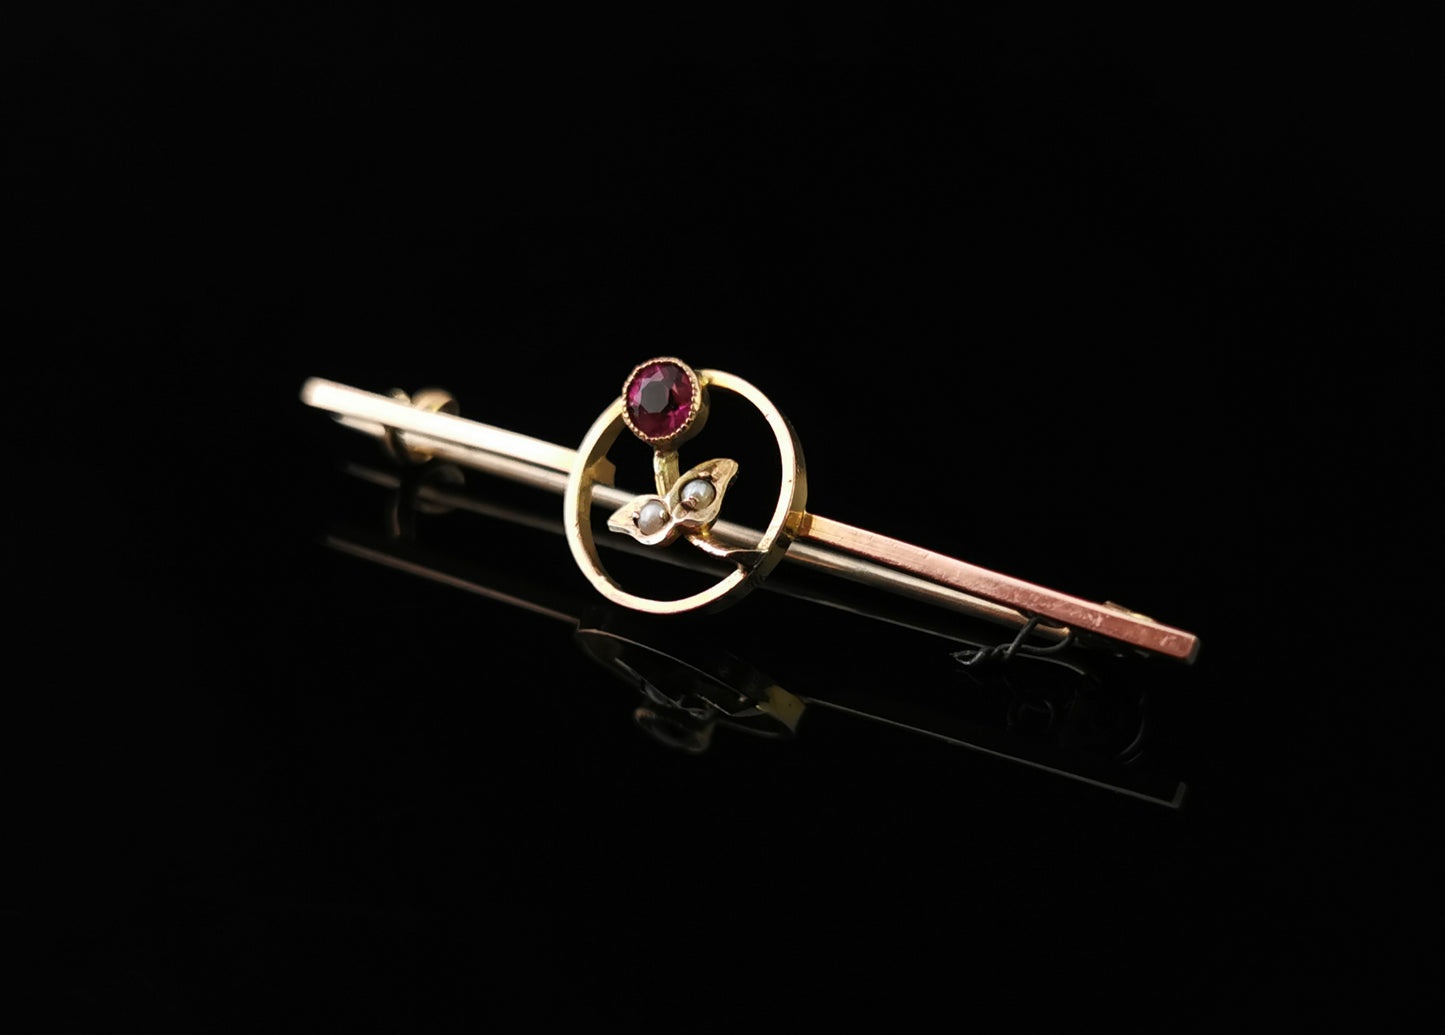 Antique 9ct gold floral bar brooch, Ruby paste and seed pearl, Art nouveau